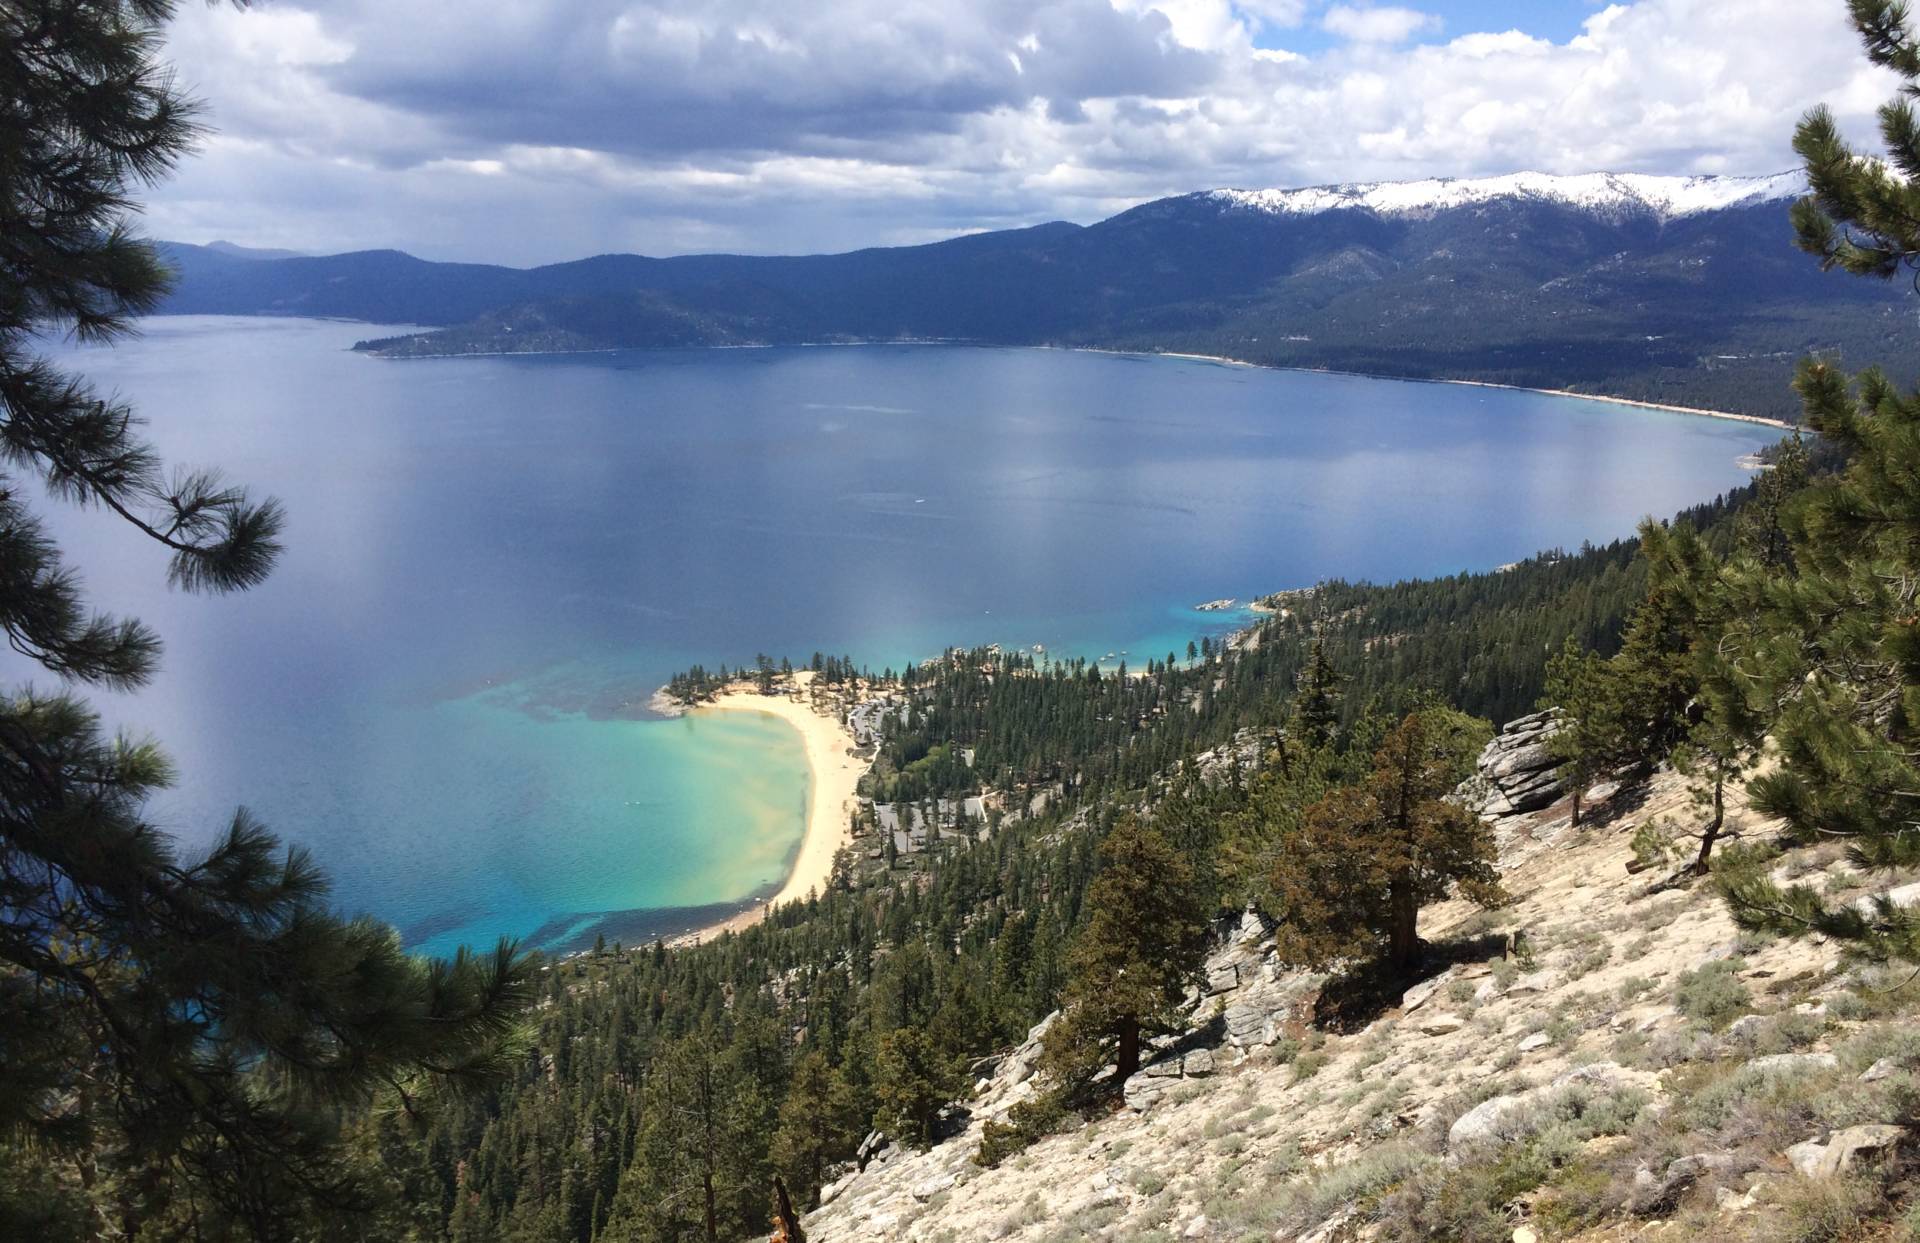 By late July 2017, the water temperature in Lake Tahoe had reached 68 degrees--5 degrees above average water temperature for this time of year. Lindsey Hoshaw